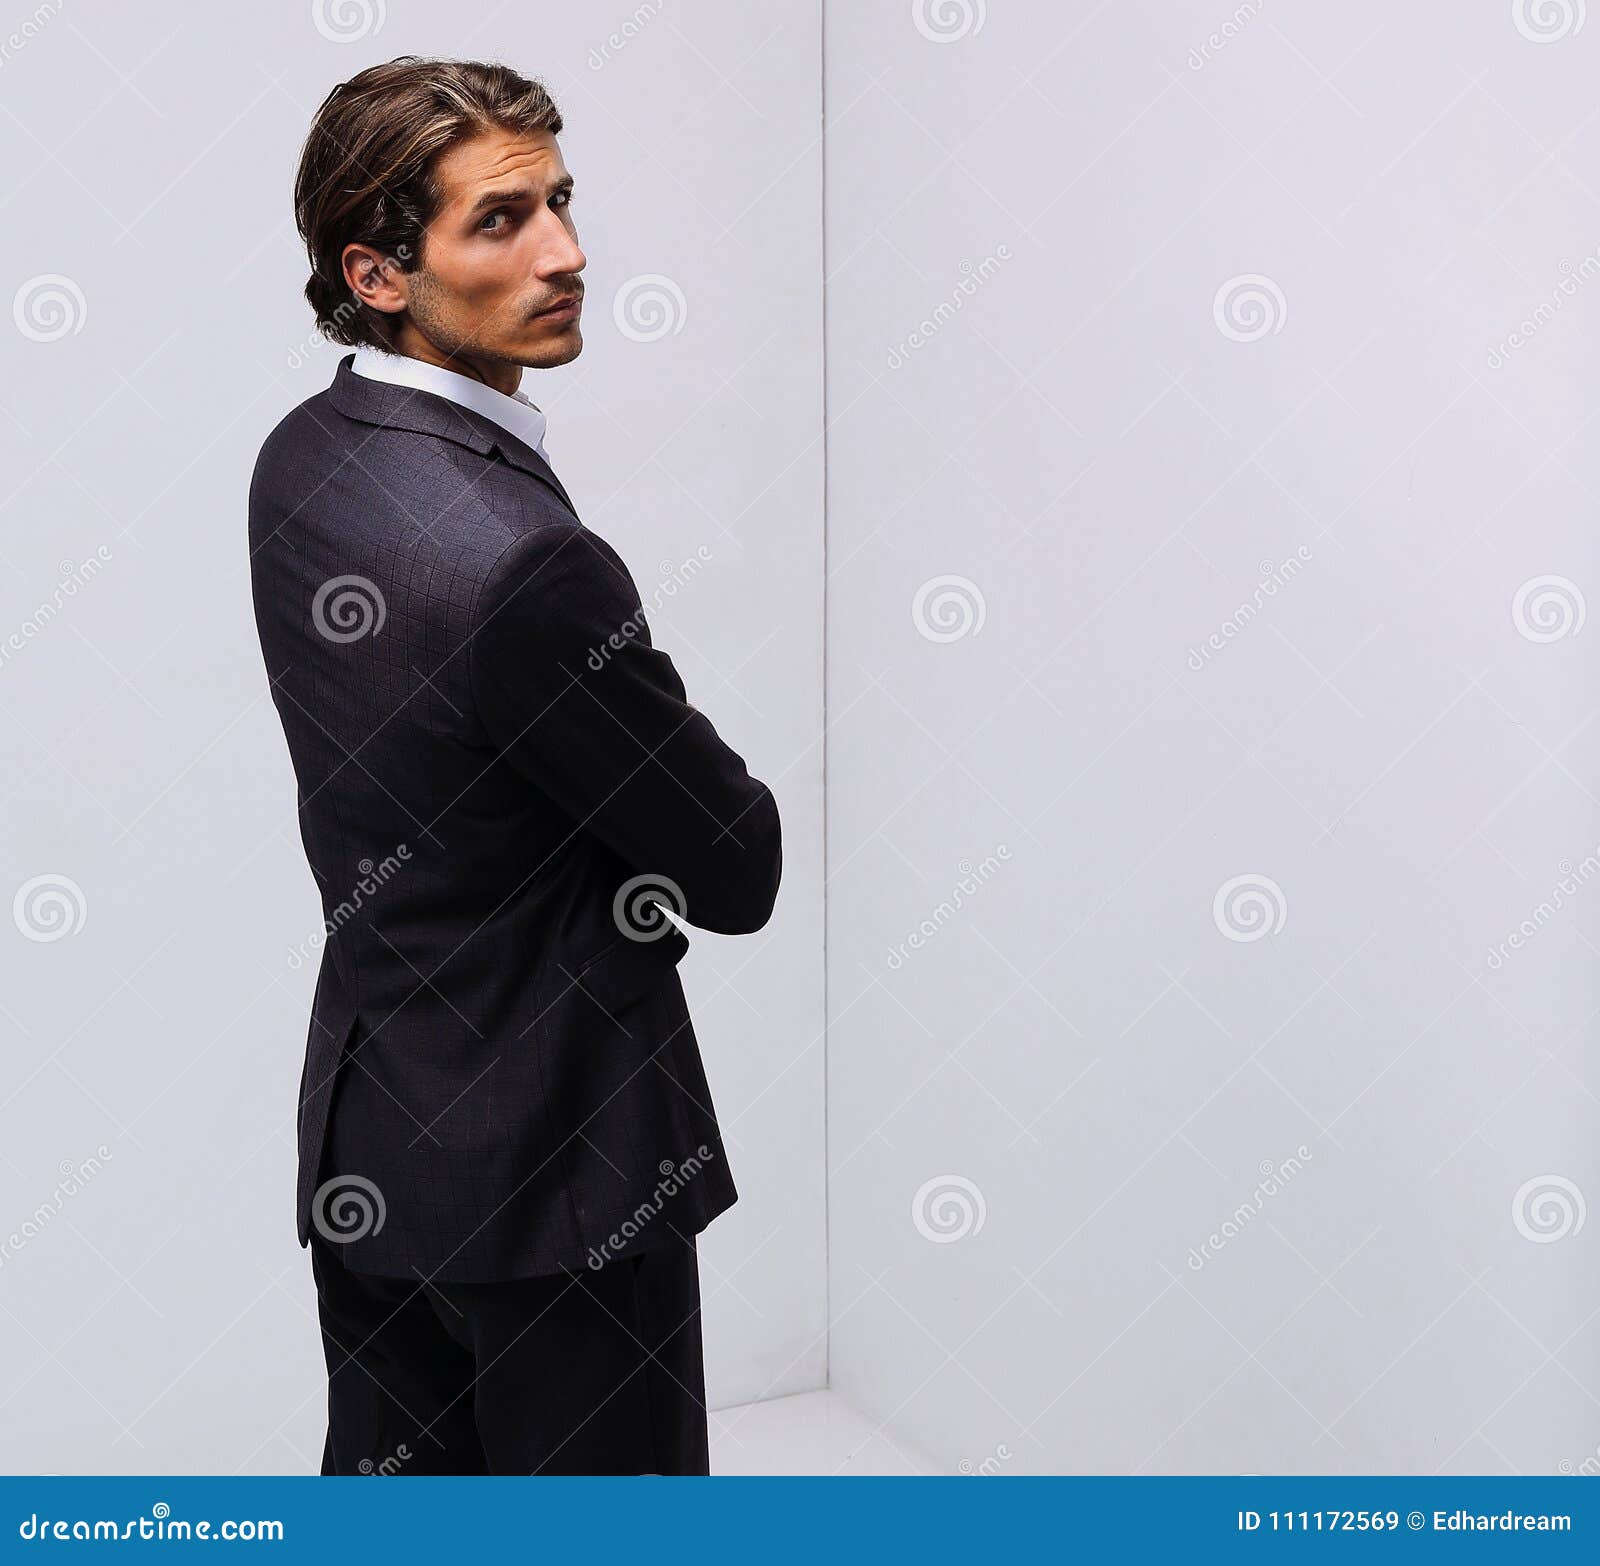 Serious Businessman Standing in Corner Stock Image - Image of lifestyle ...